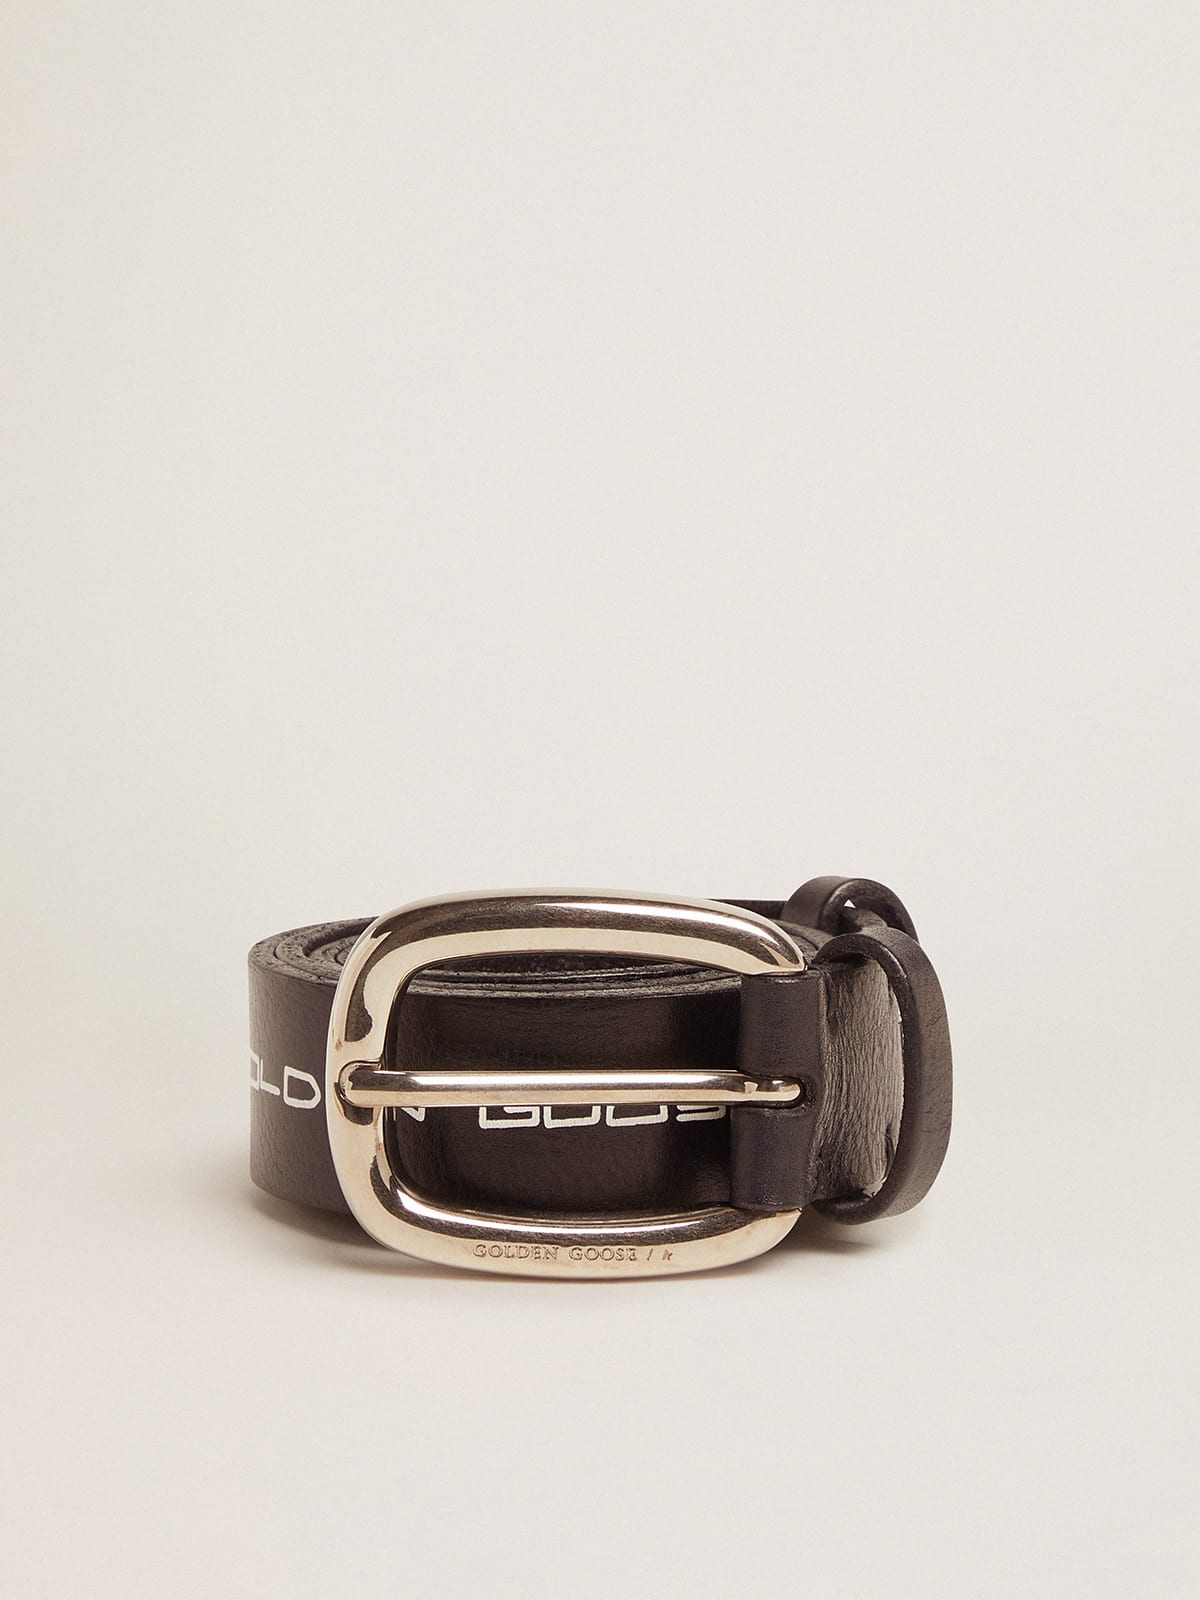 Houston belt in black leather with contrasting handwritten lettering